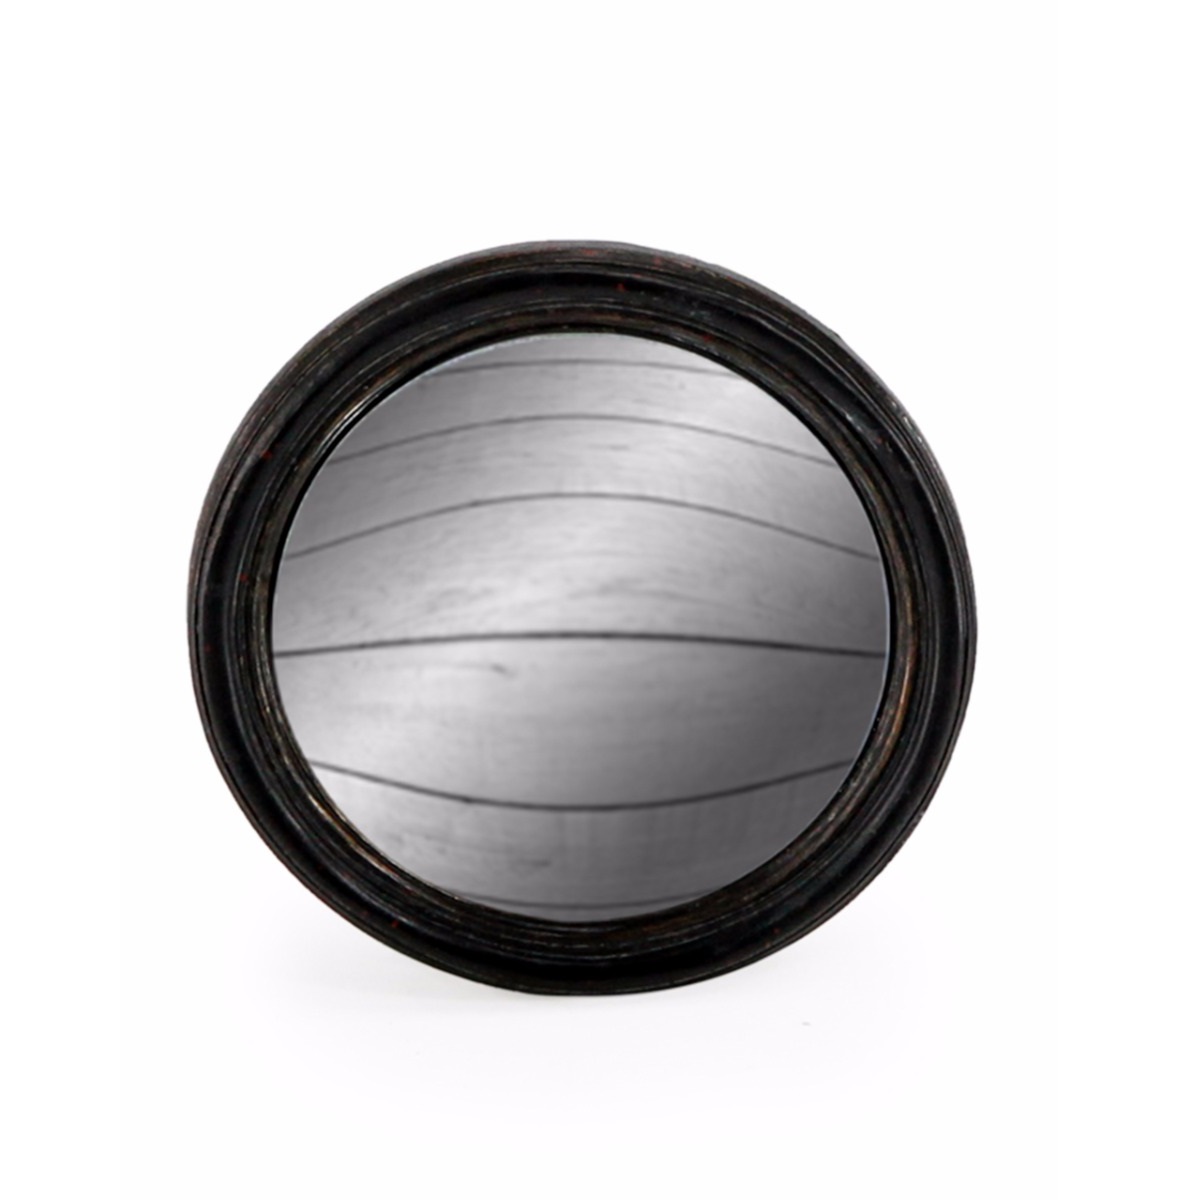 &Quirky Black Thin Framed Small Convex Mirror